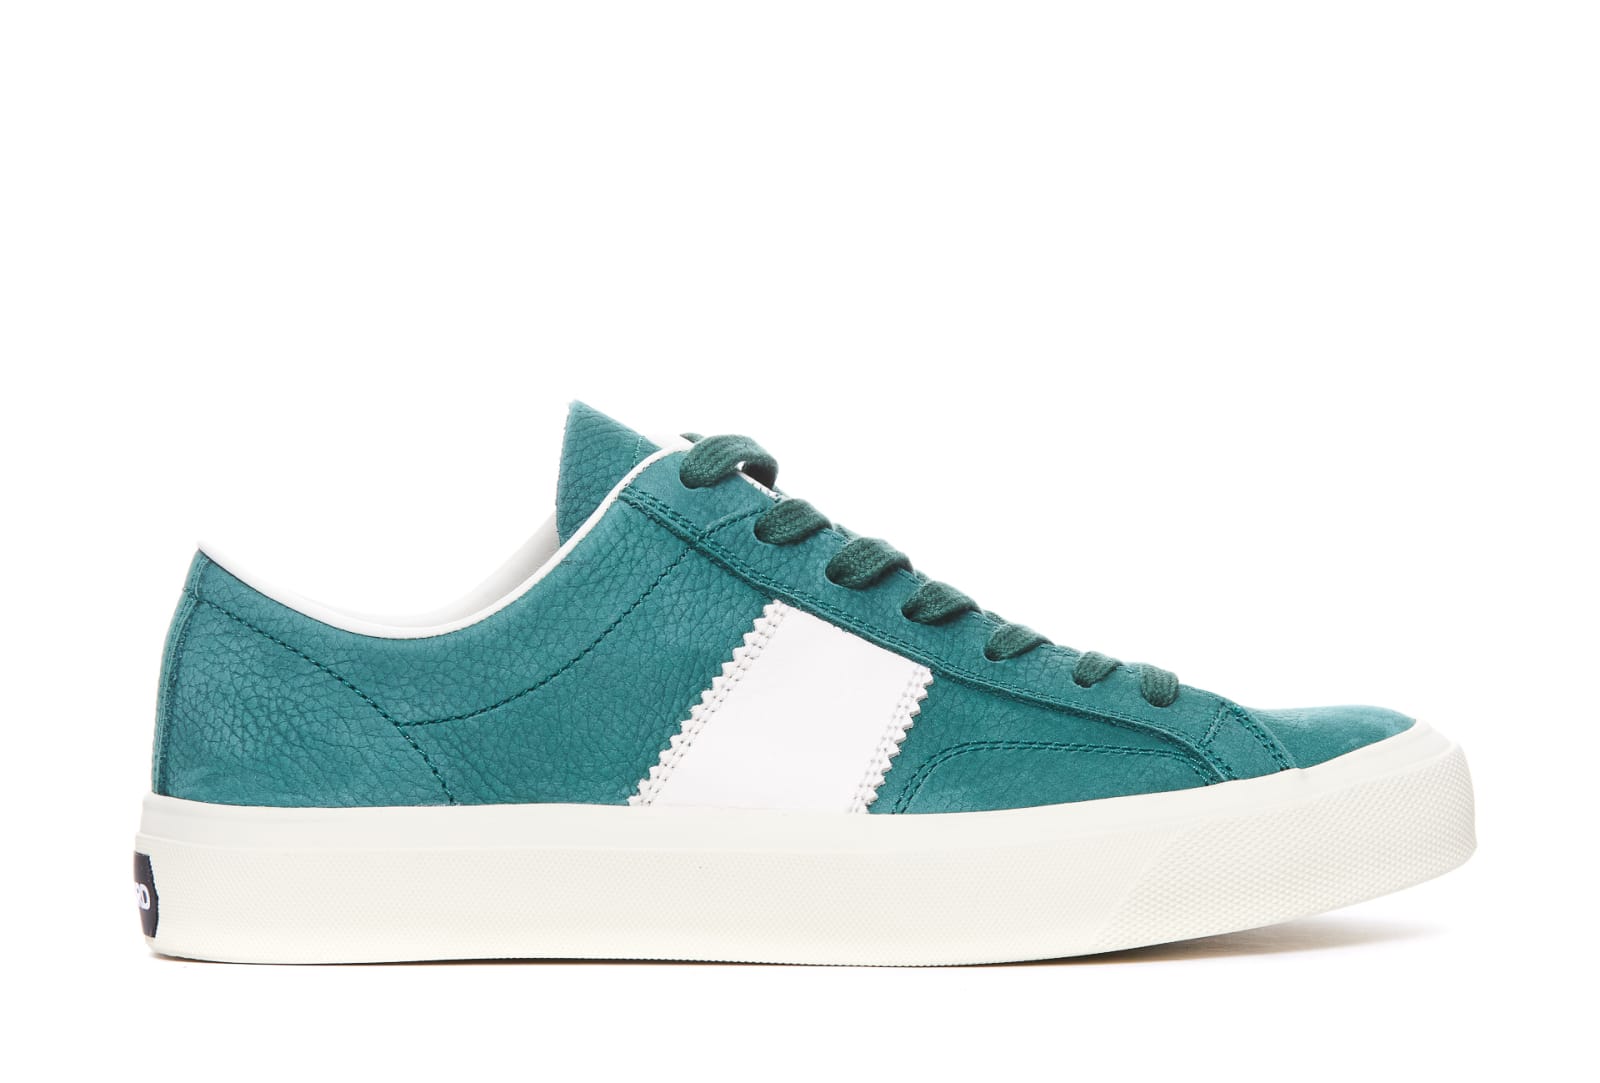 TOM FORD SUEDE CAMBRIDGE SNEAKERS